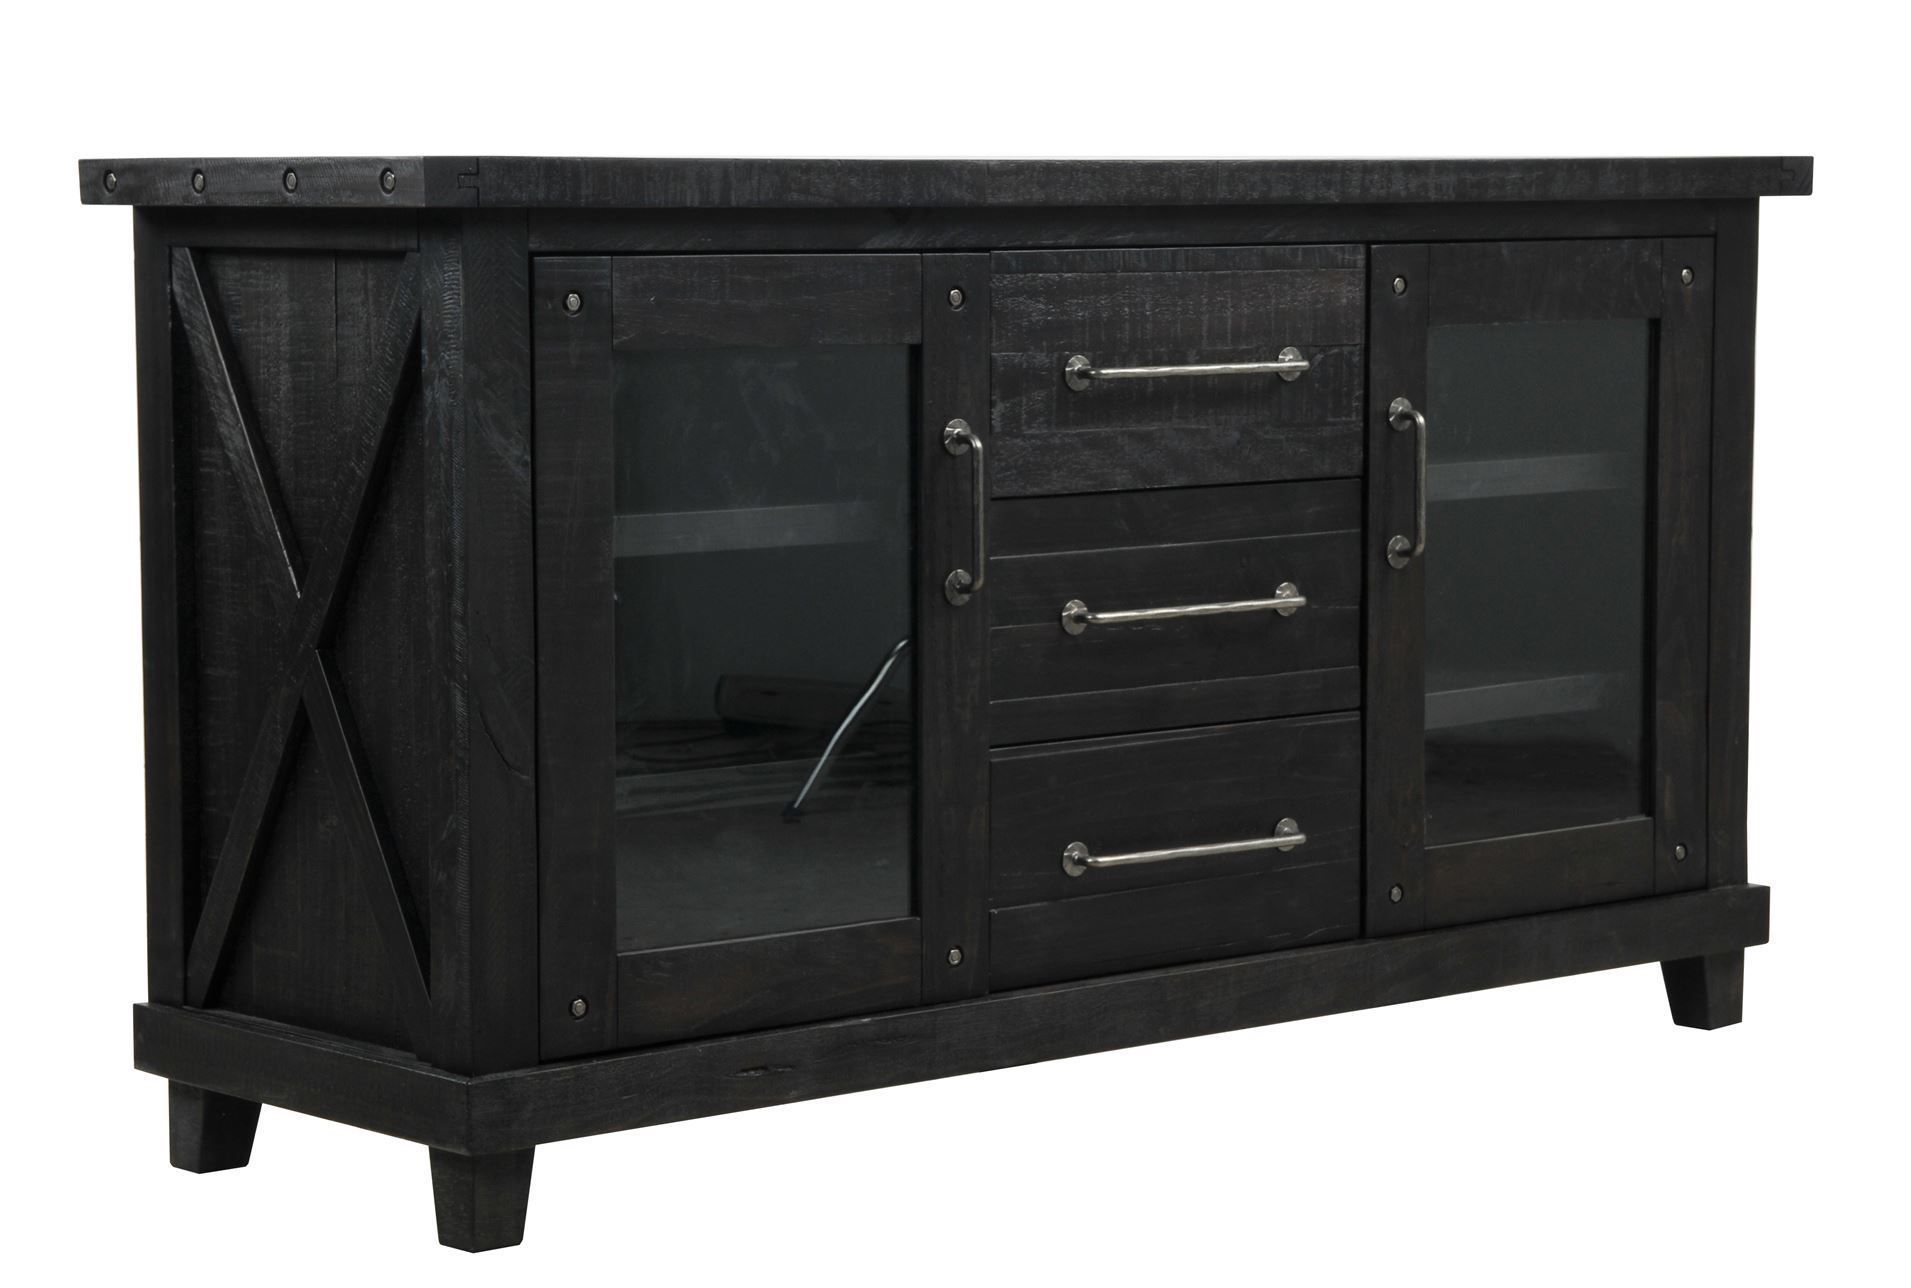 Jaxon Sideboard | Home Sweet Home | Sideboard, Sideboard Within Best And Newest Langsa Sideboards (View 4 of 20)